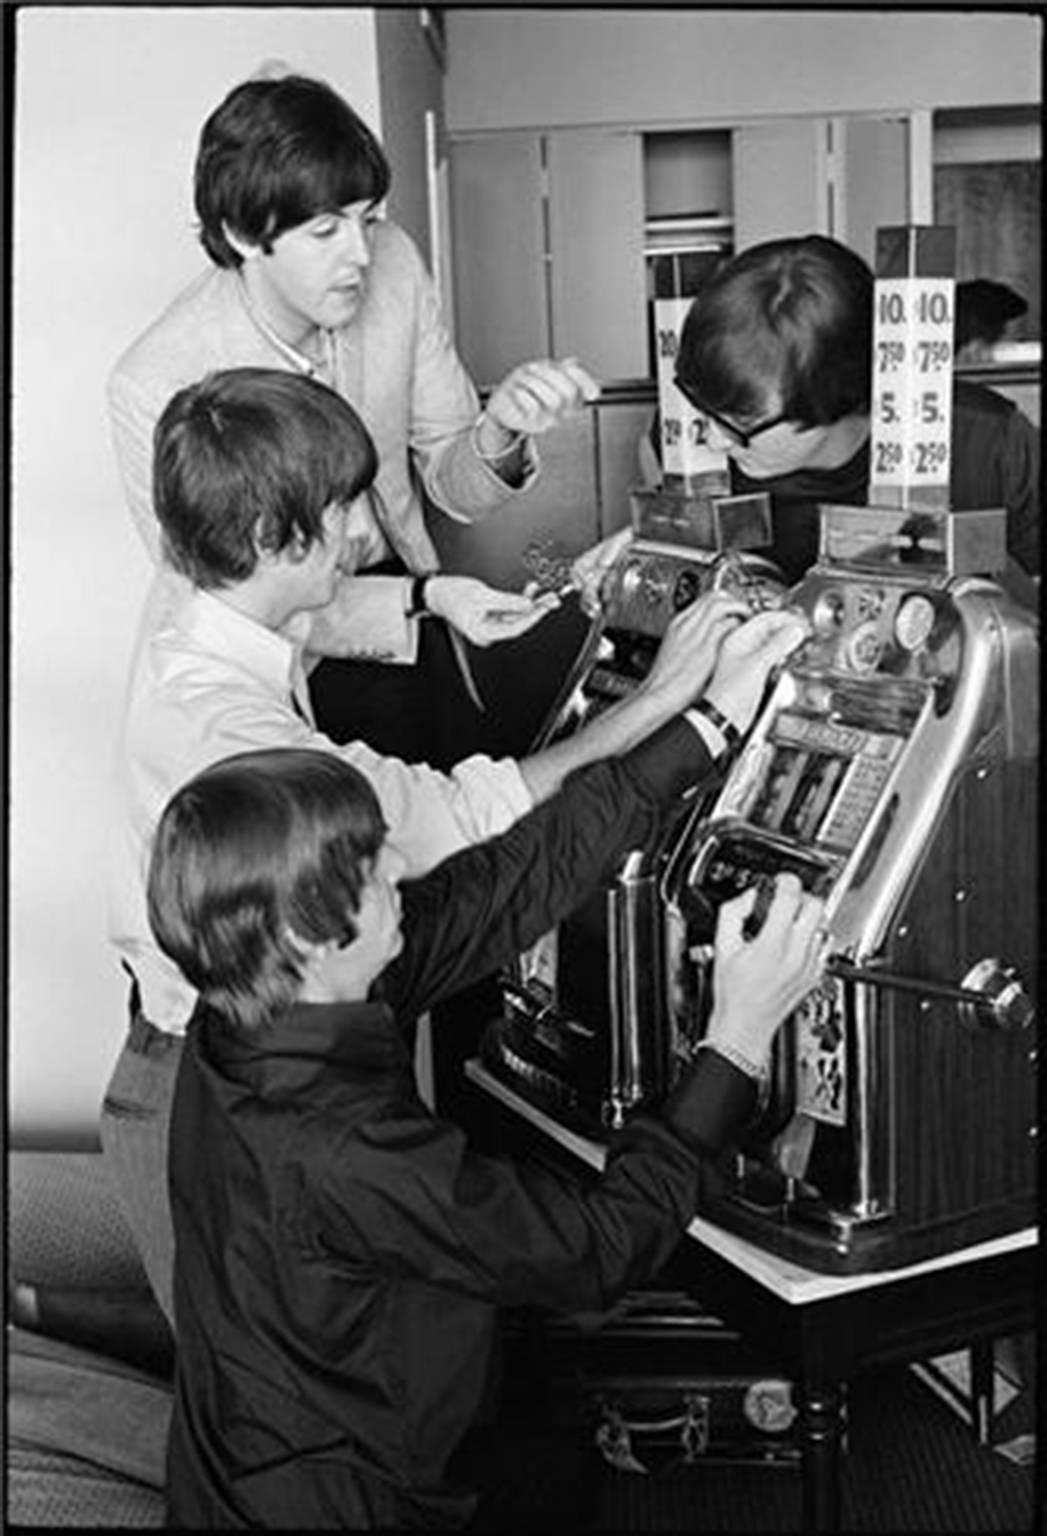 Curt Gunther Black and White Photograph - The Beatles on a Slot Machine